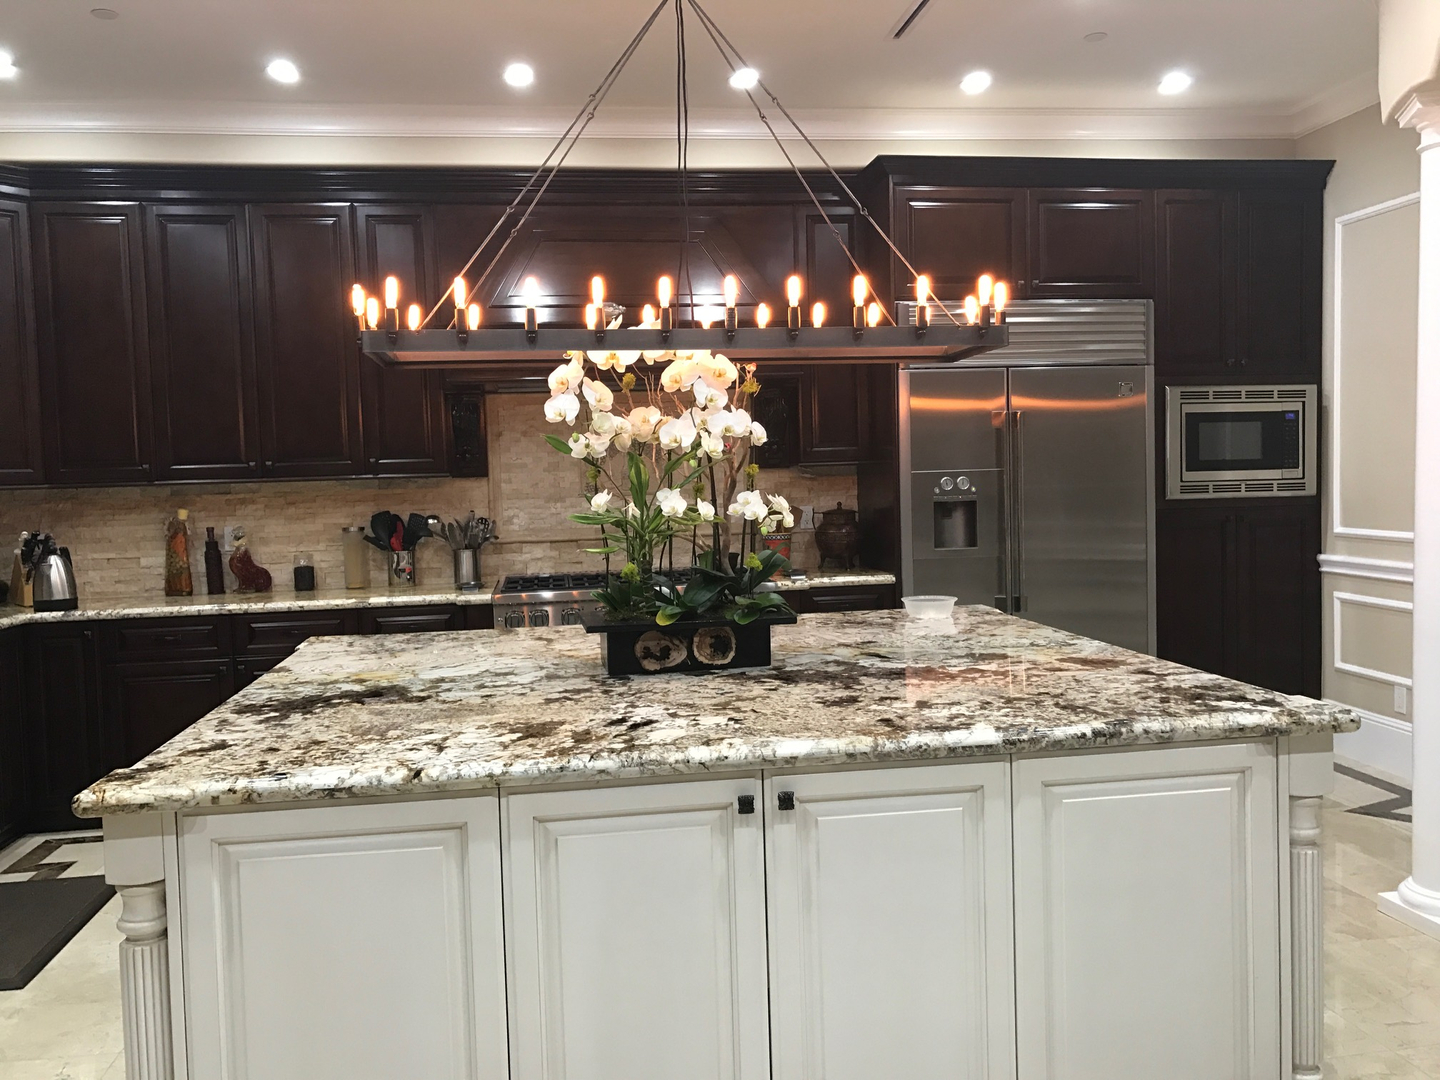 Marble kitchen countertop with unique lighting